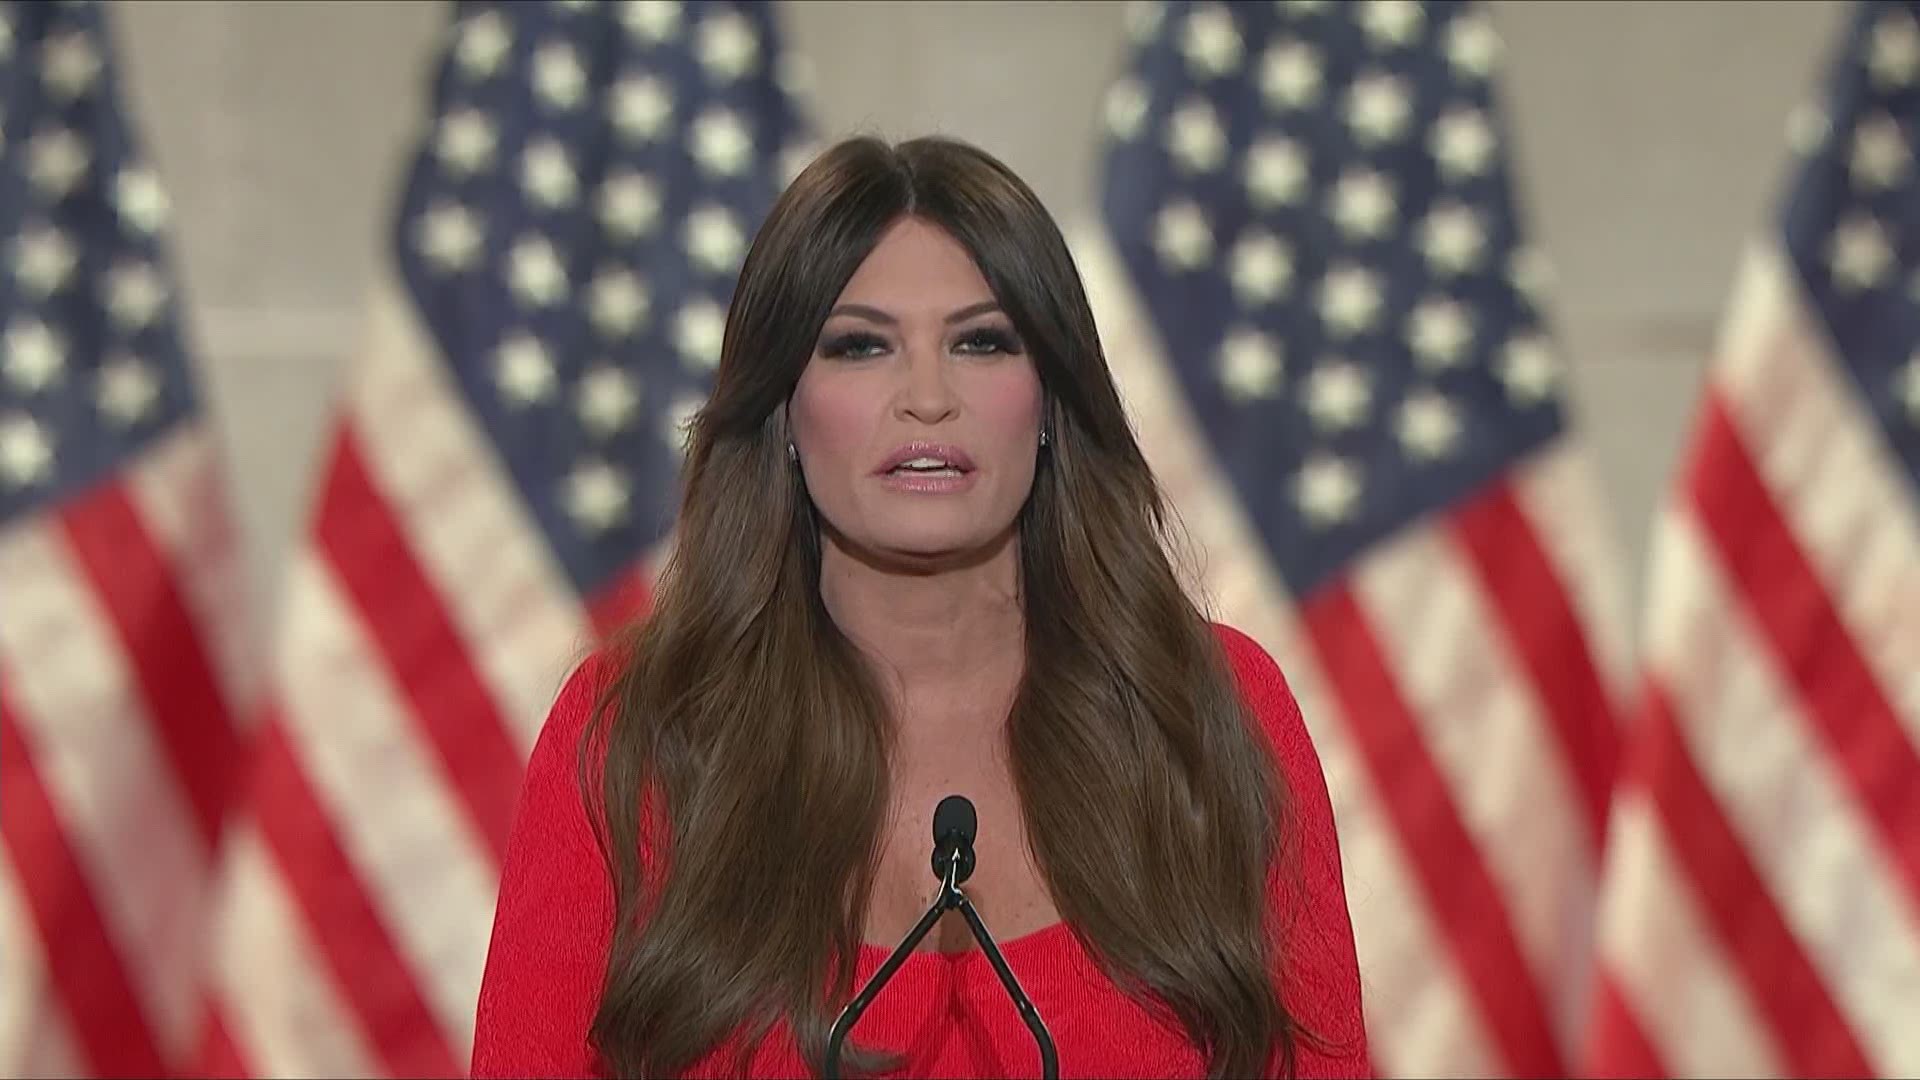 Kimberly Guilfoyle, girlfriend of Donald Trump Jr., speaks at the Republican National Convention.